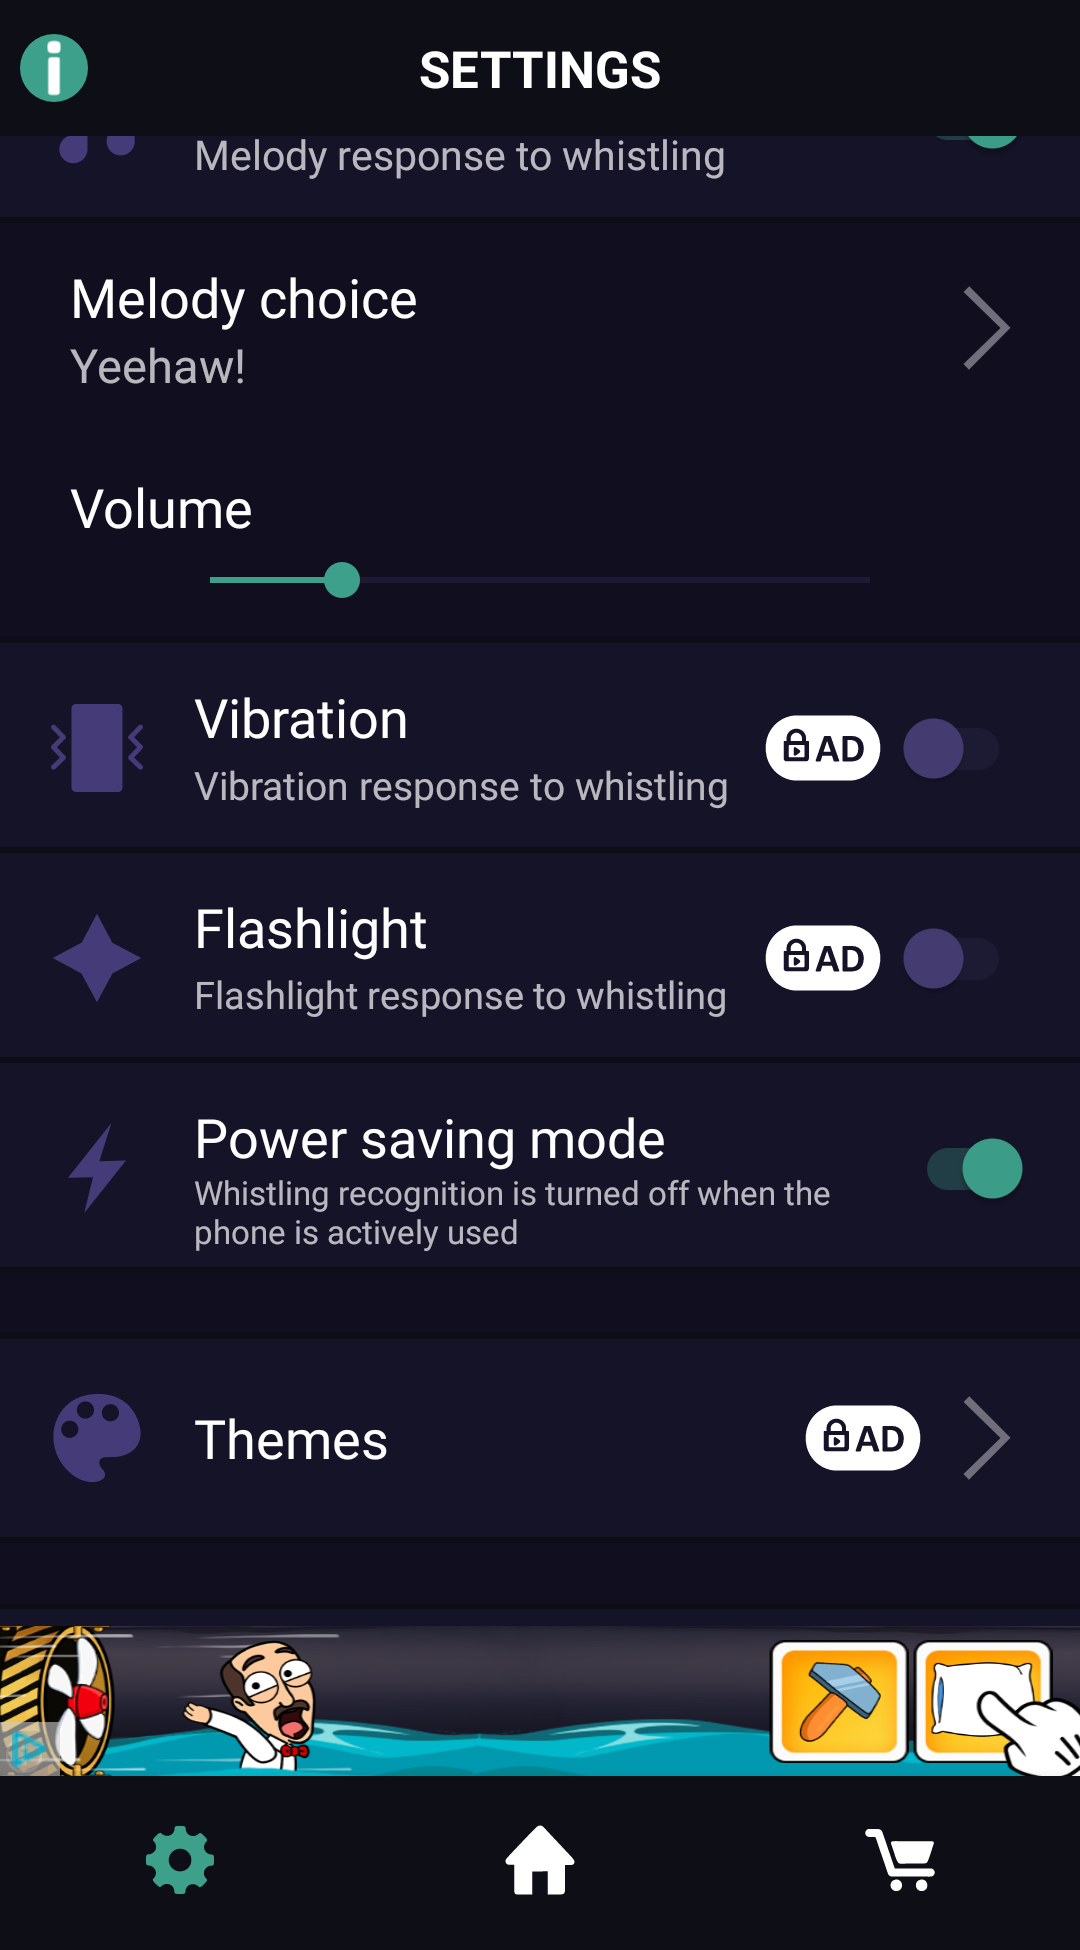 find my phone whistle app settings